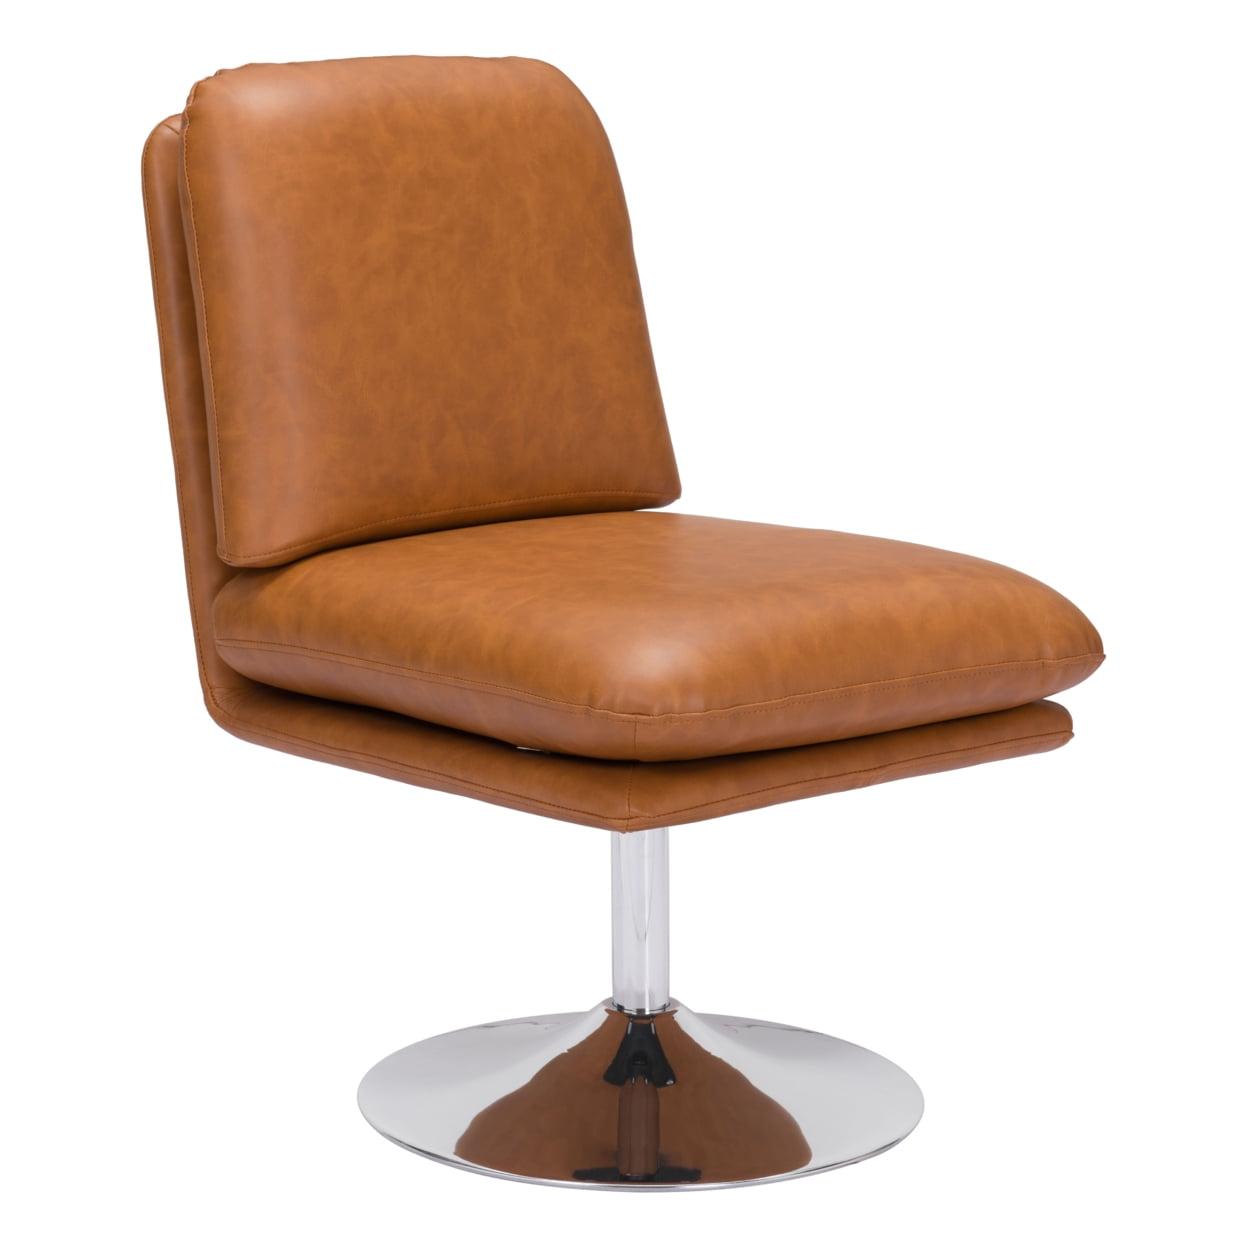 Contemporary Rory Swivel Slipper Chair in Warm Brown Faux Leather